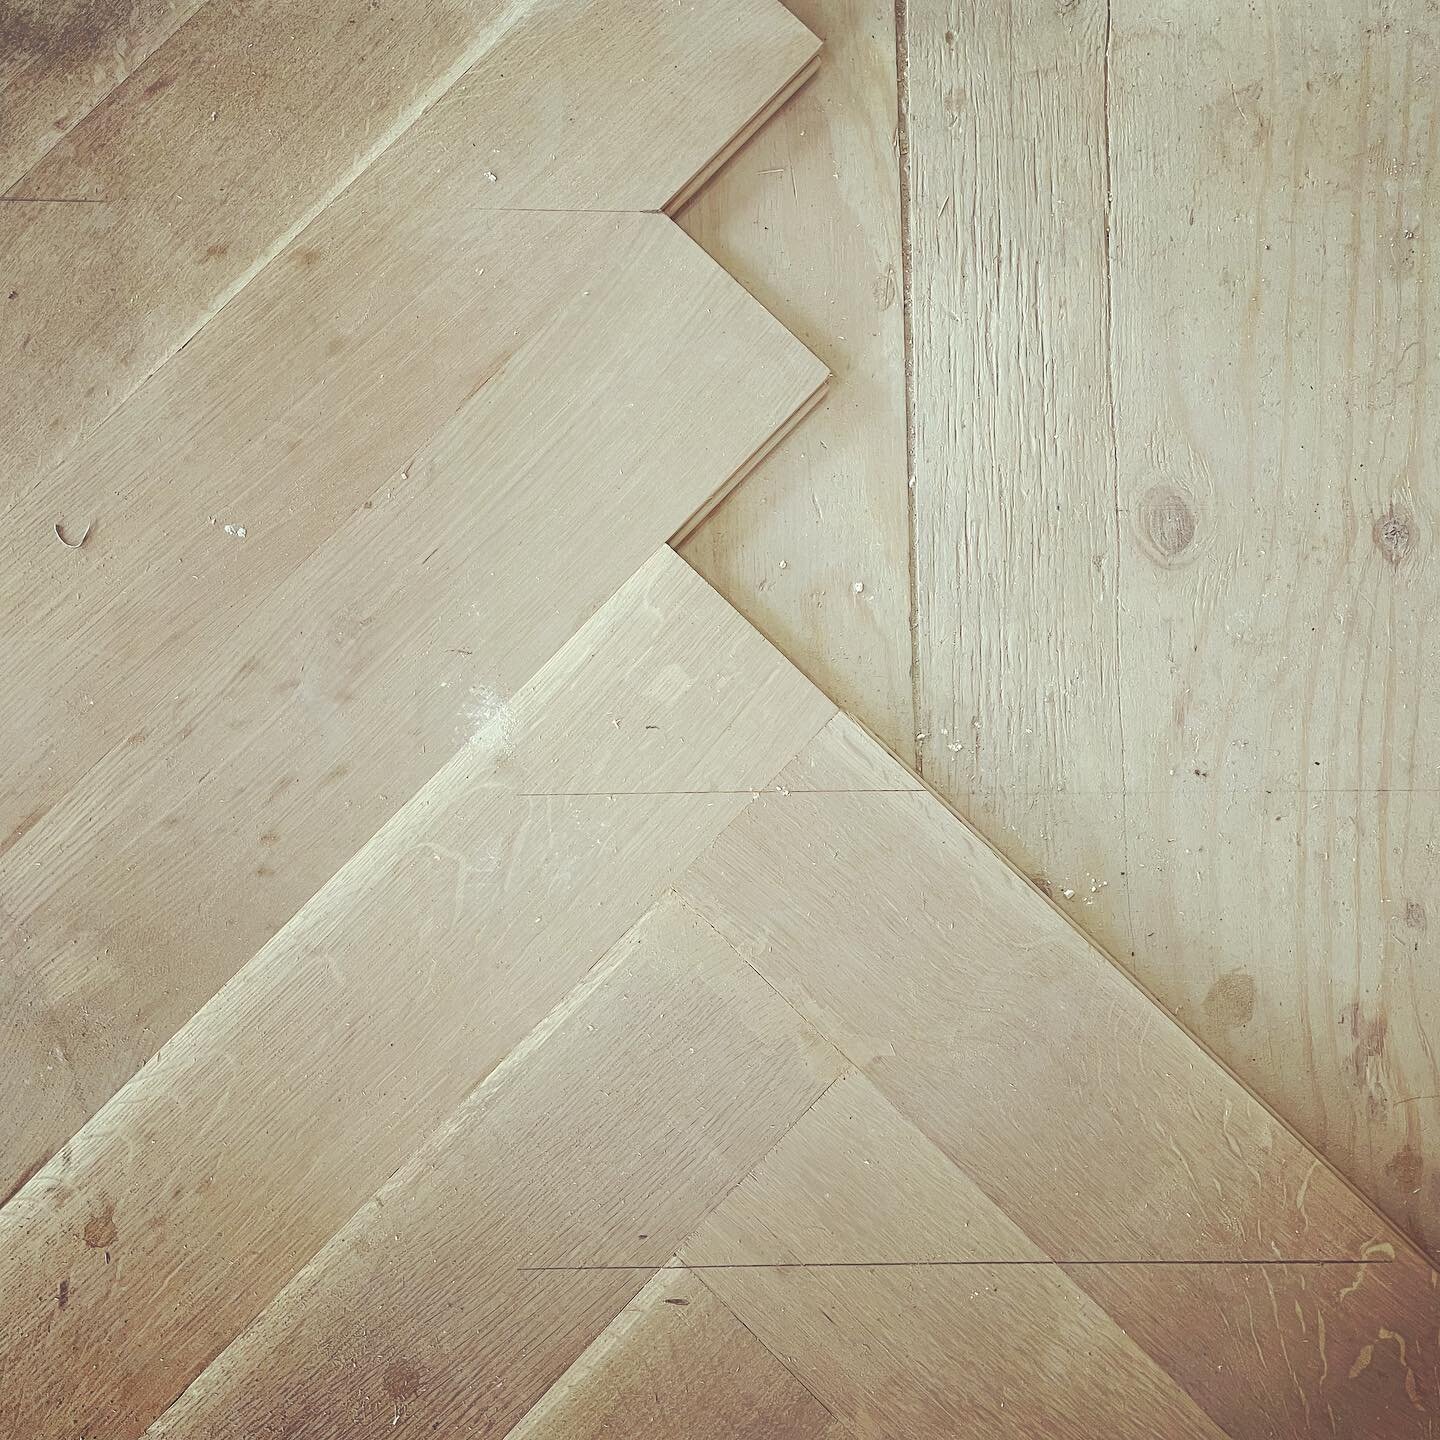 Stretching up some herringbone to a 6&rdquo; white oak board for larger rooms in #brooklynheights. All eyes are waiting for installation of borders to come.
.
.
.
#renovation #wood #craft #architecture #design #construction